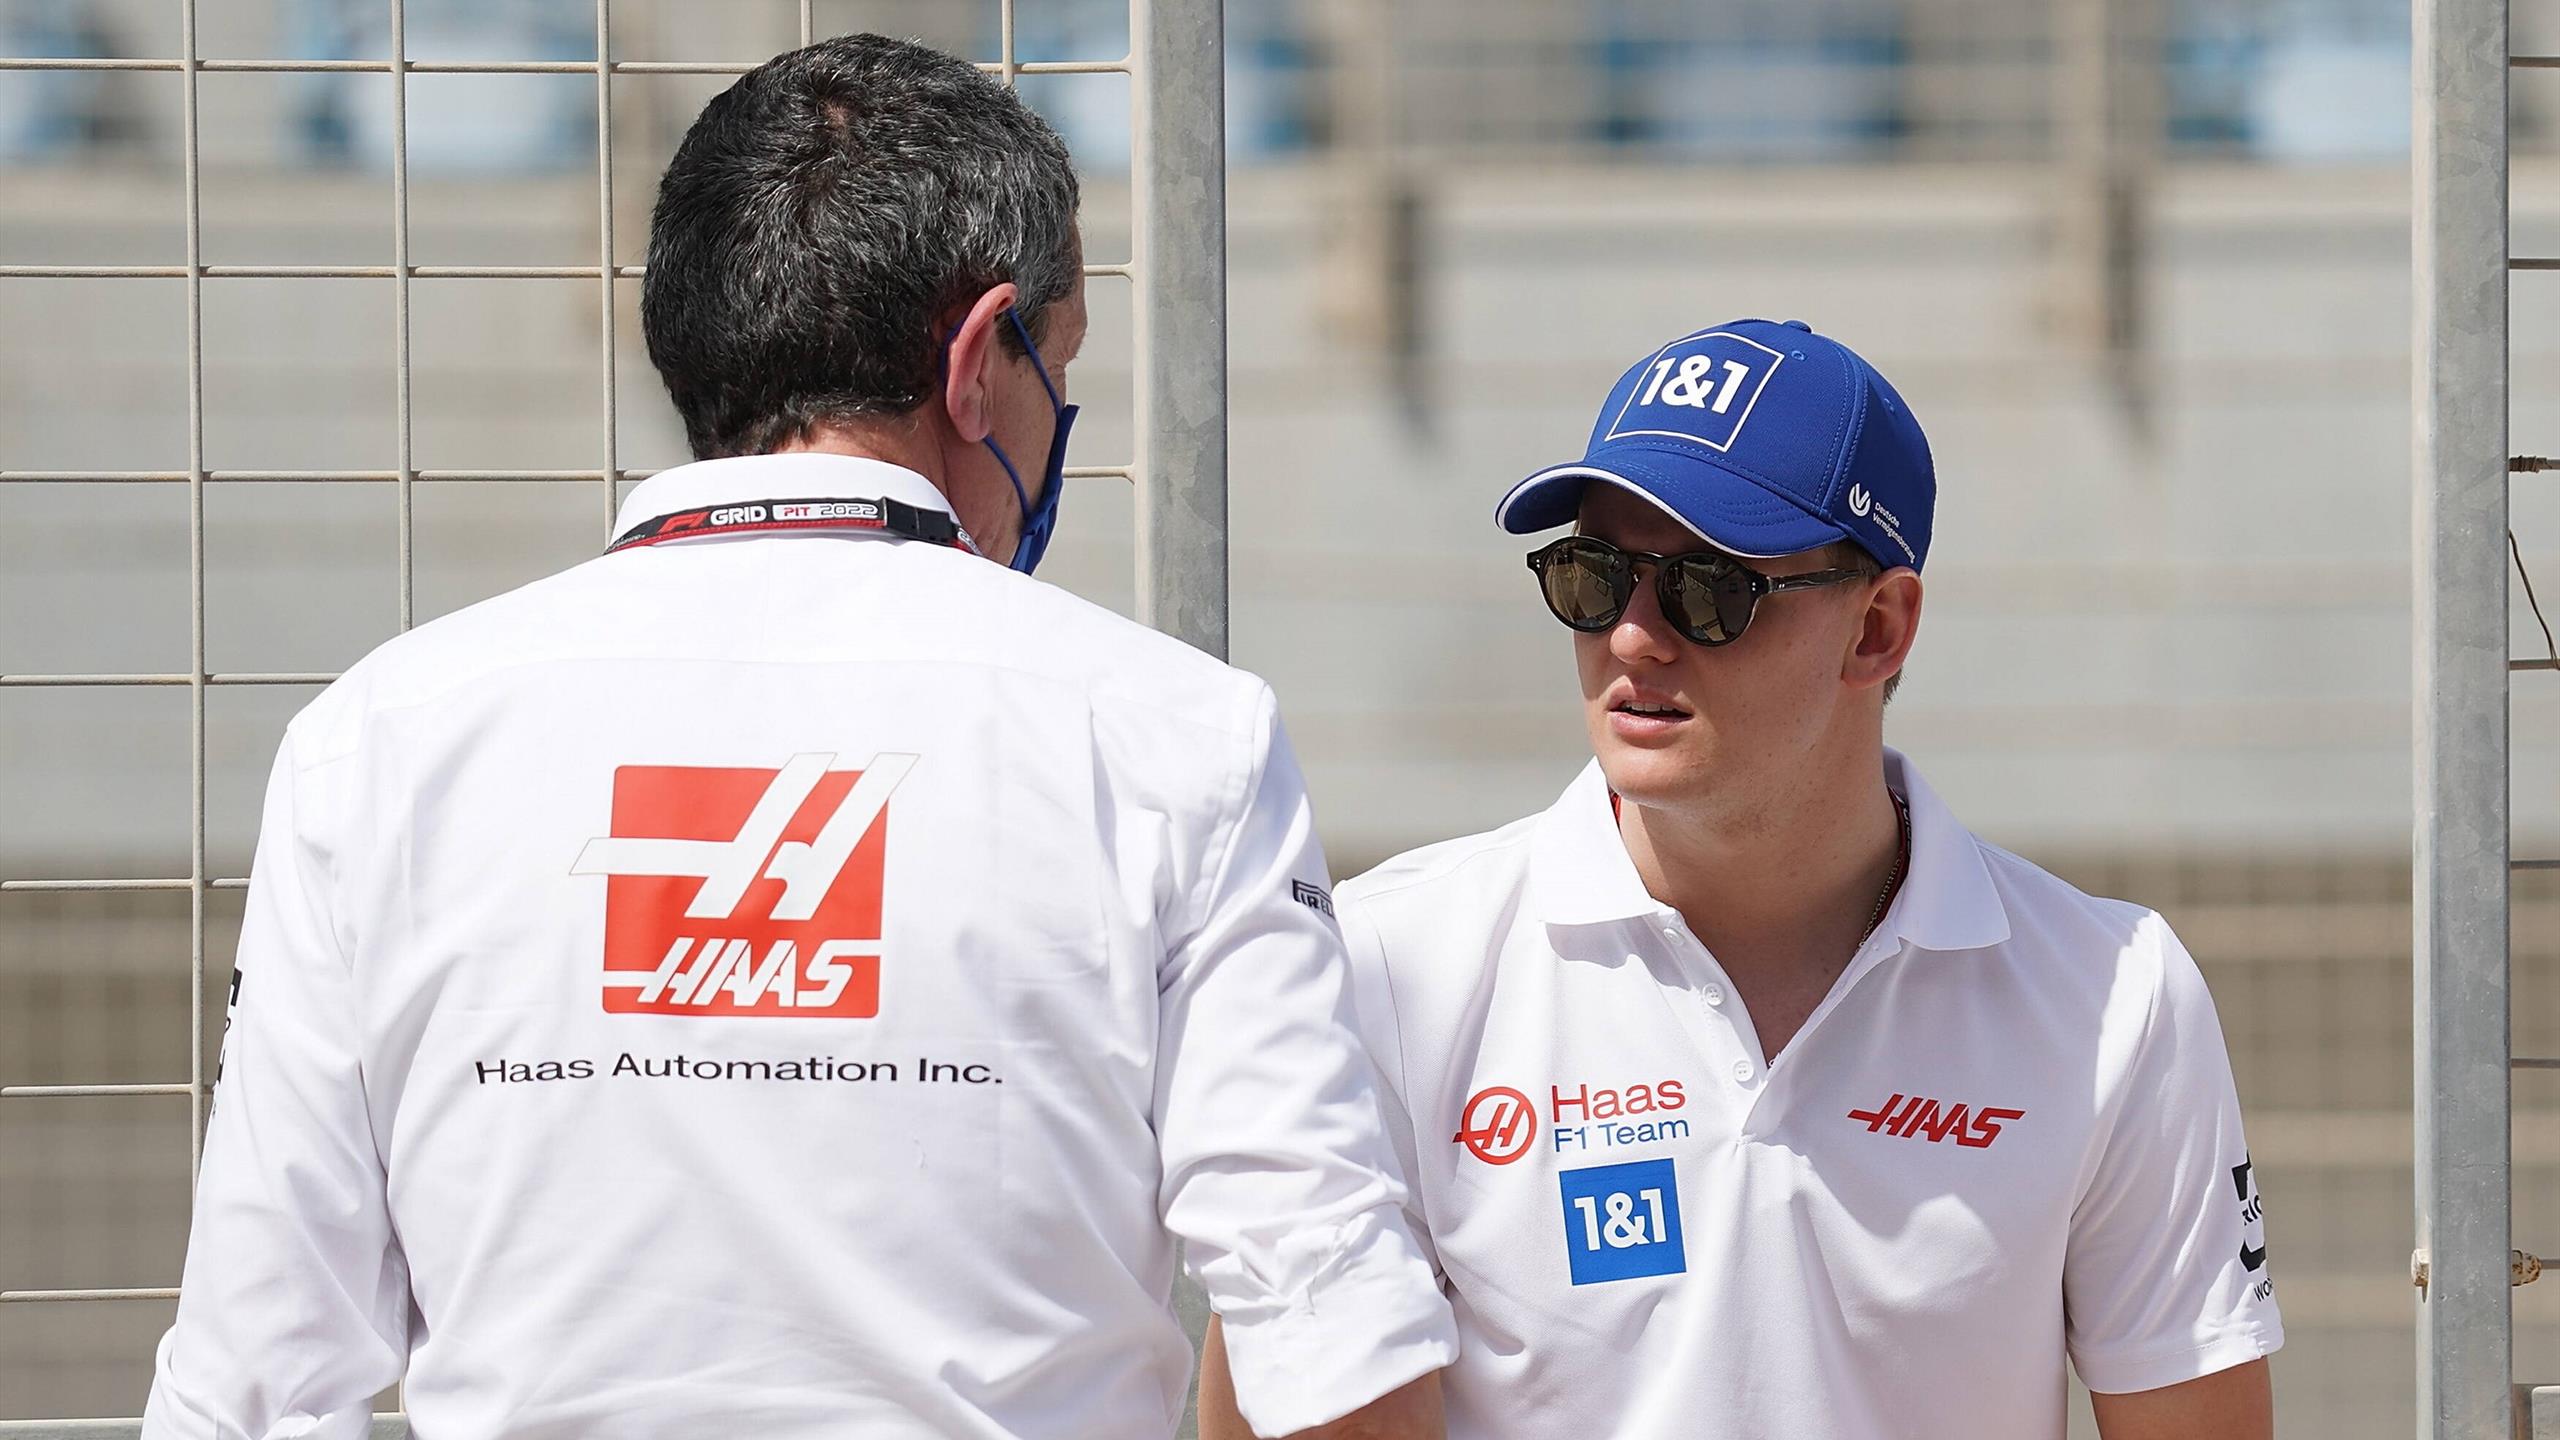 Ecclestone criticizes Haas boss for dealing with Mick Schumacher: Father shows Steiner where to go